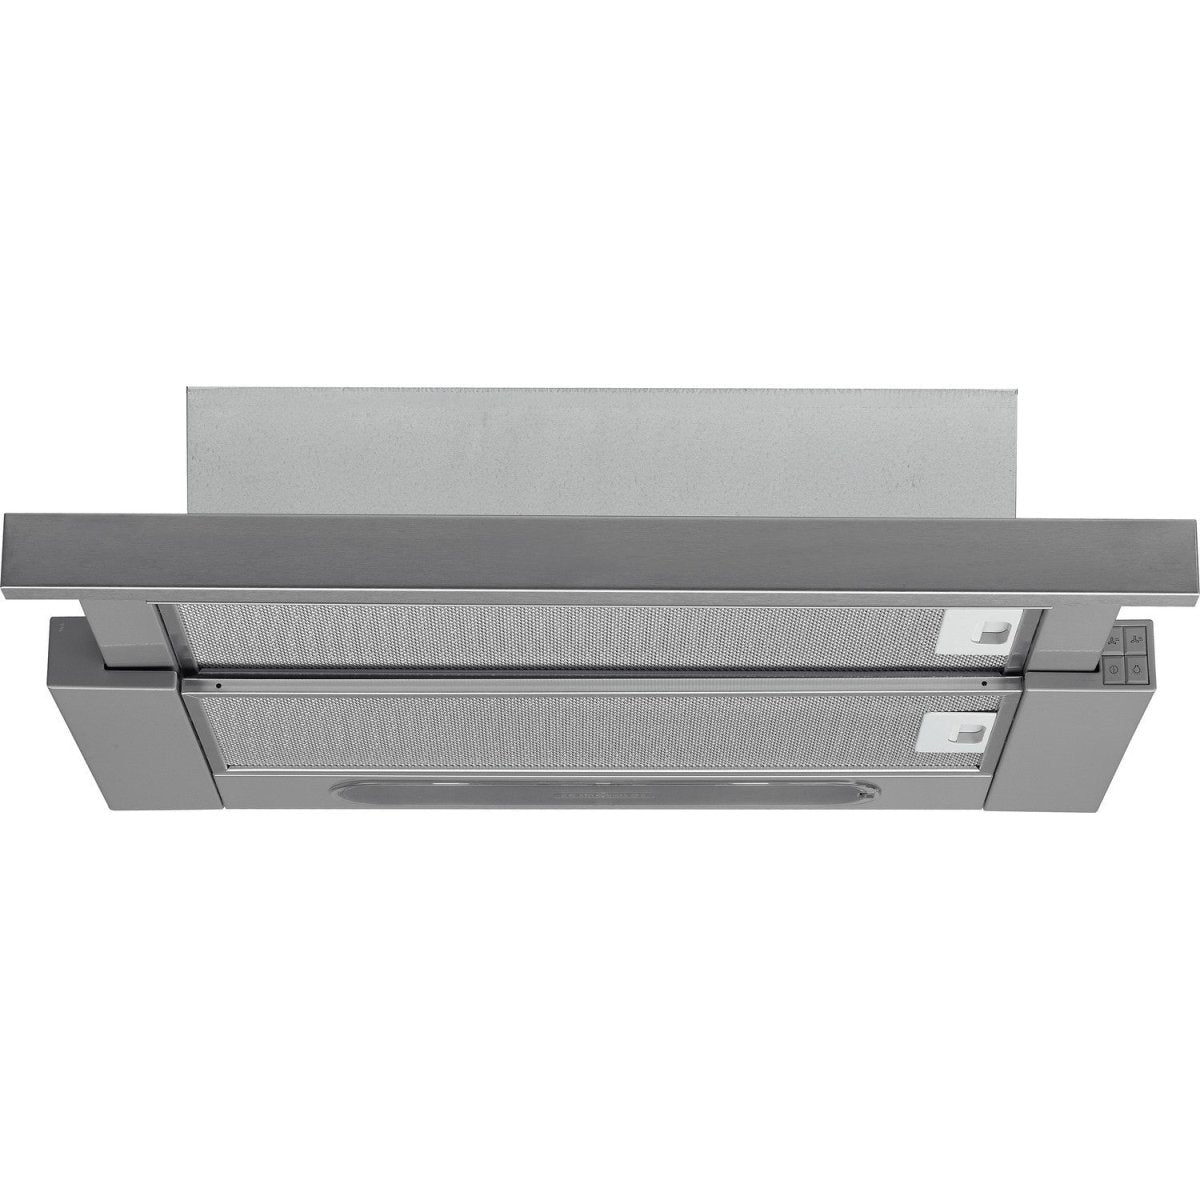 Hotpoint HSFX 60cm wide Telescopic Cooker Hood Stainless Steel - Atlantic Electrics